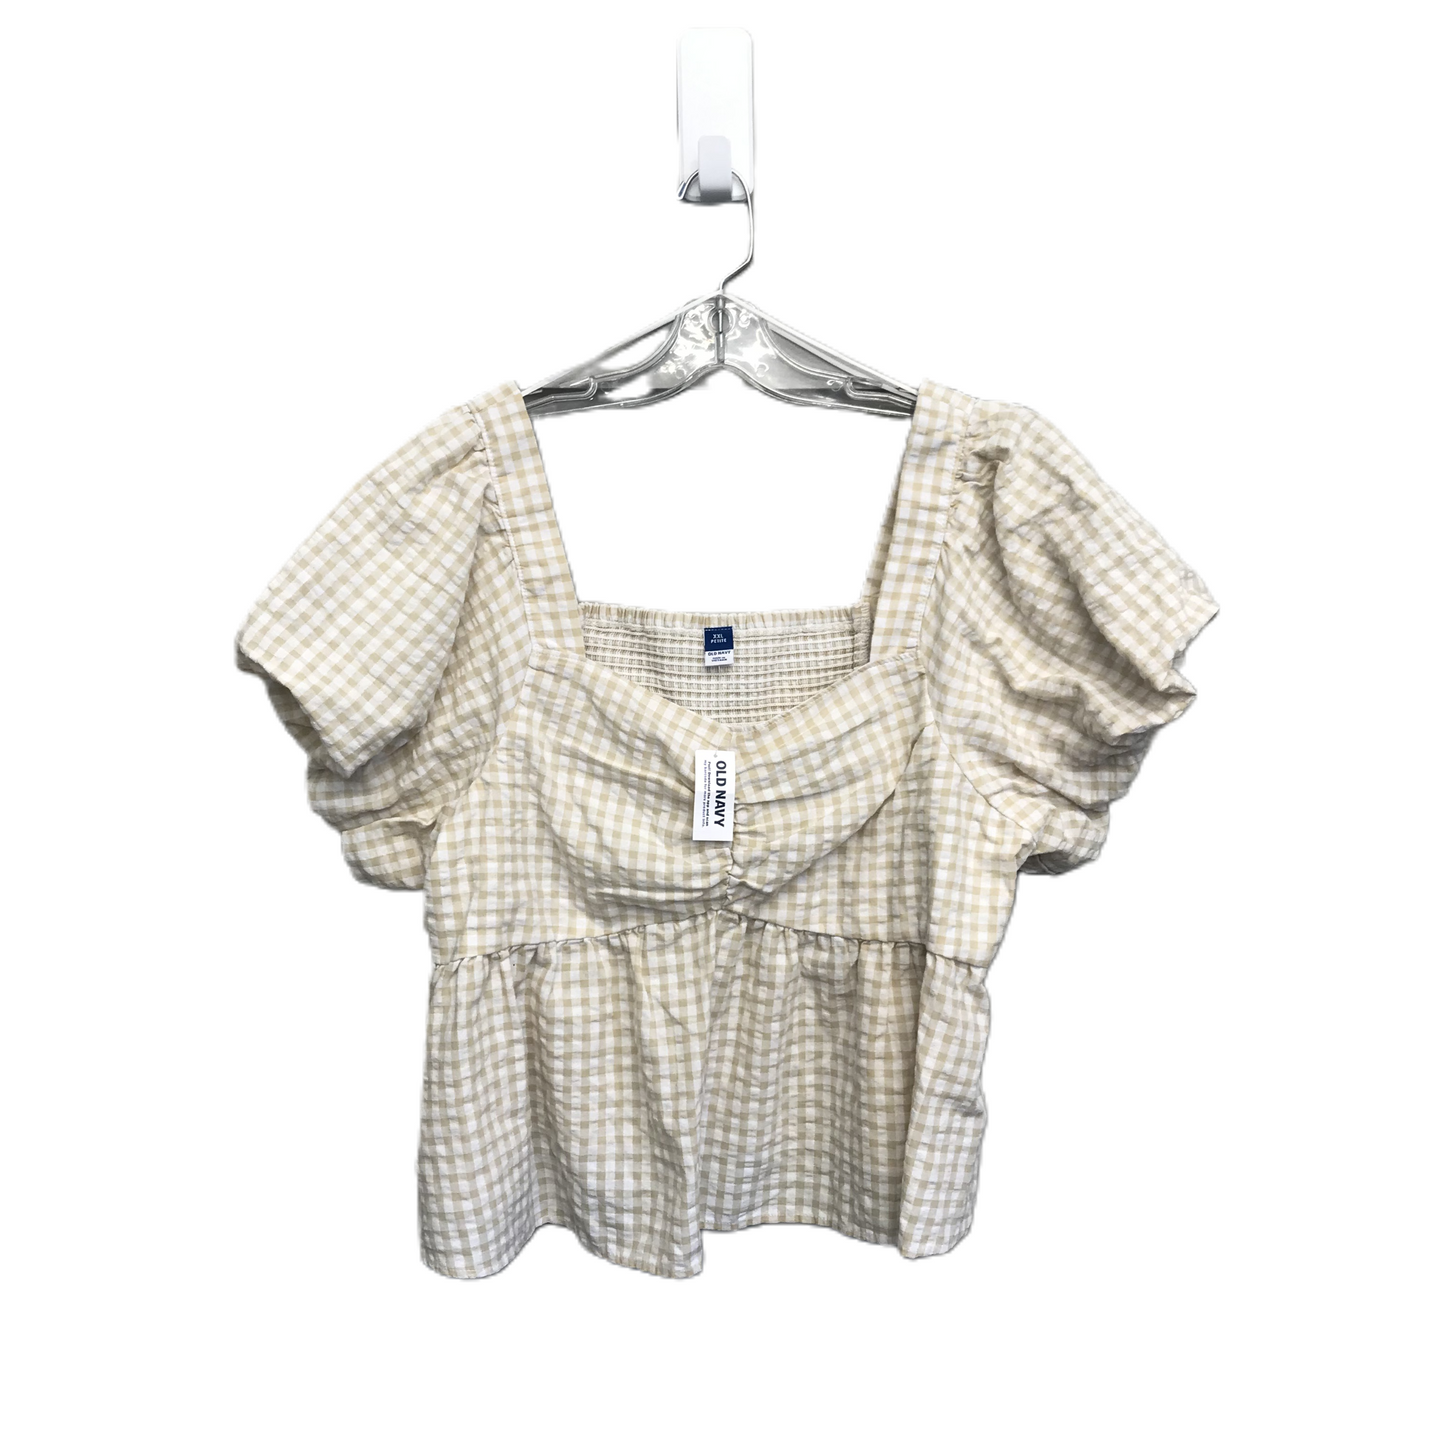 Tan & White Top Short Sleeve By Old Navy, Size: 1x